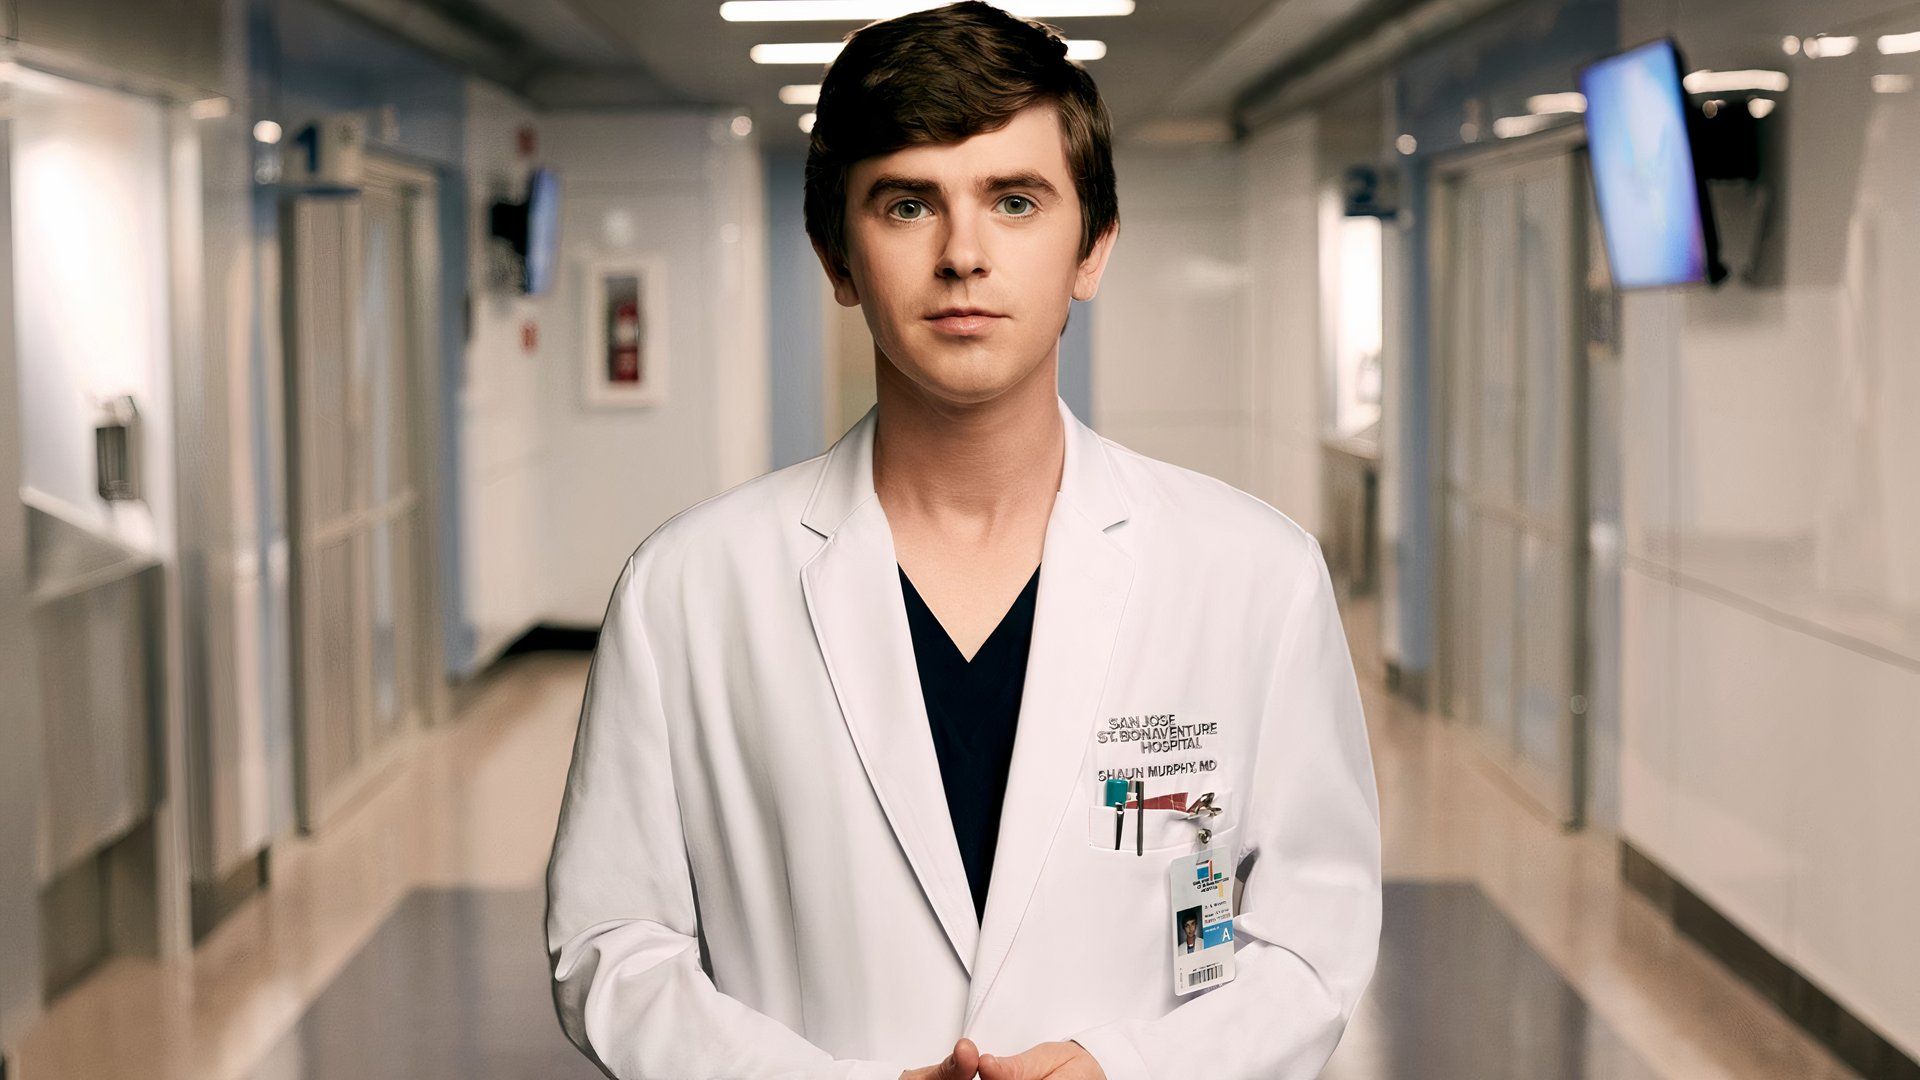 Freddie Highmore looks pensive as Dr. Shaun Murphy on The Good Doctor